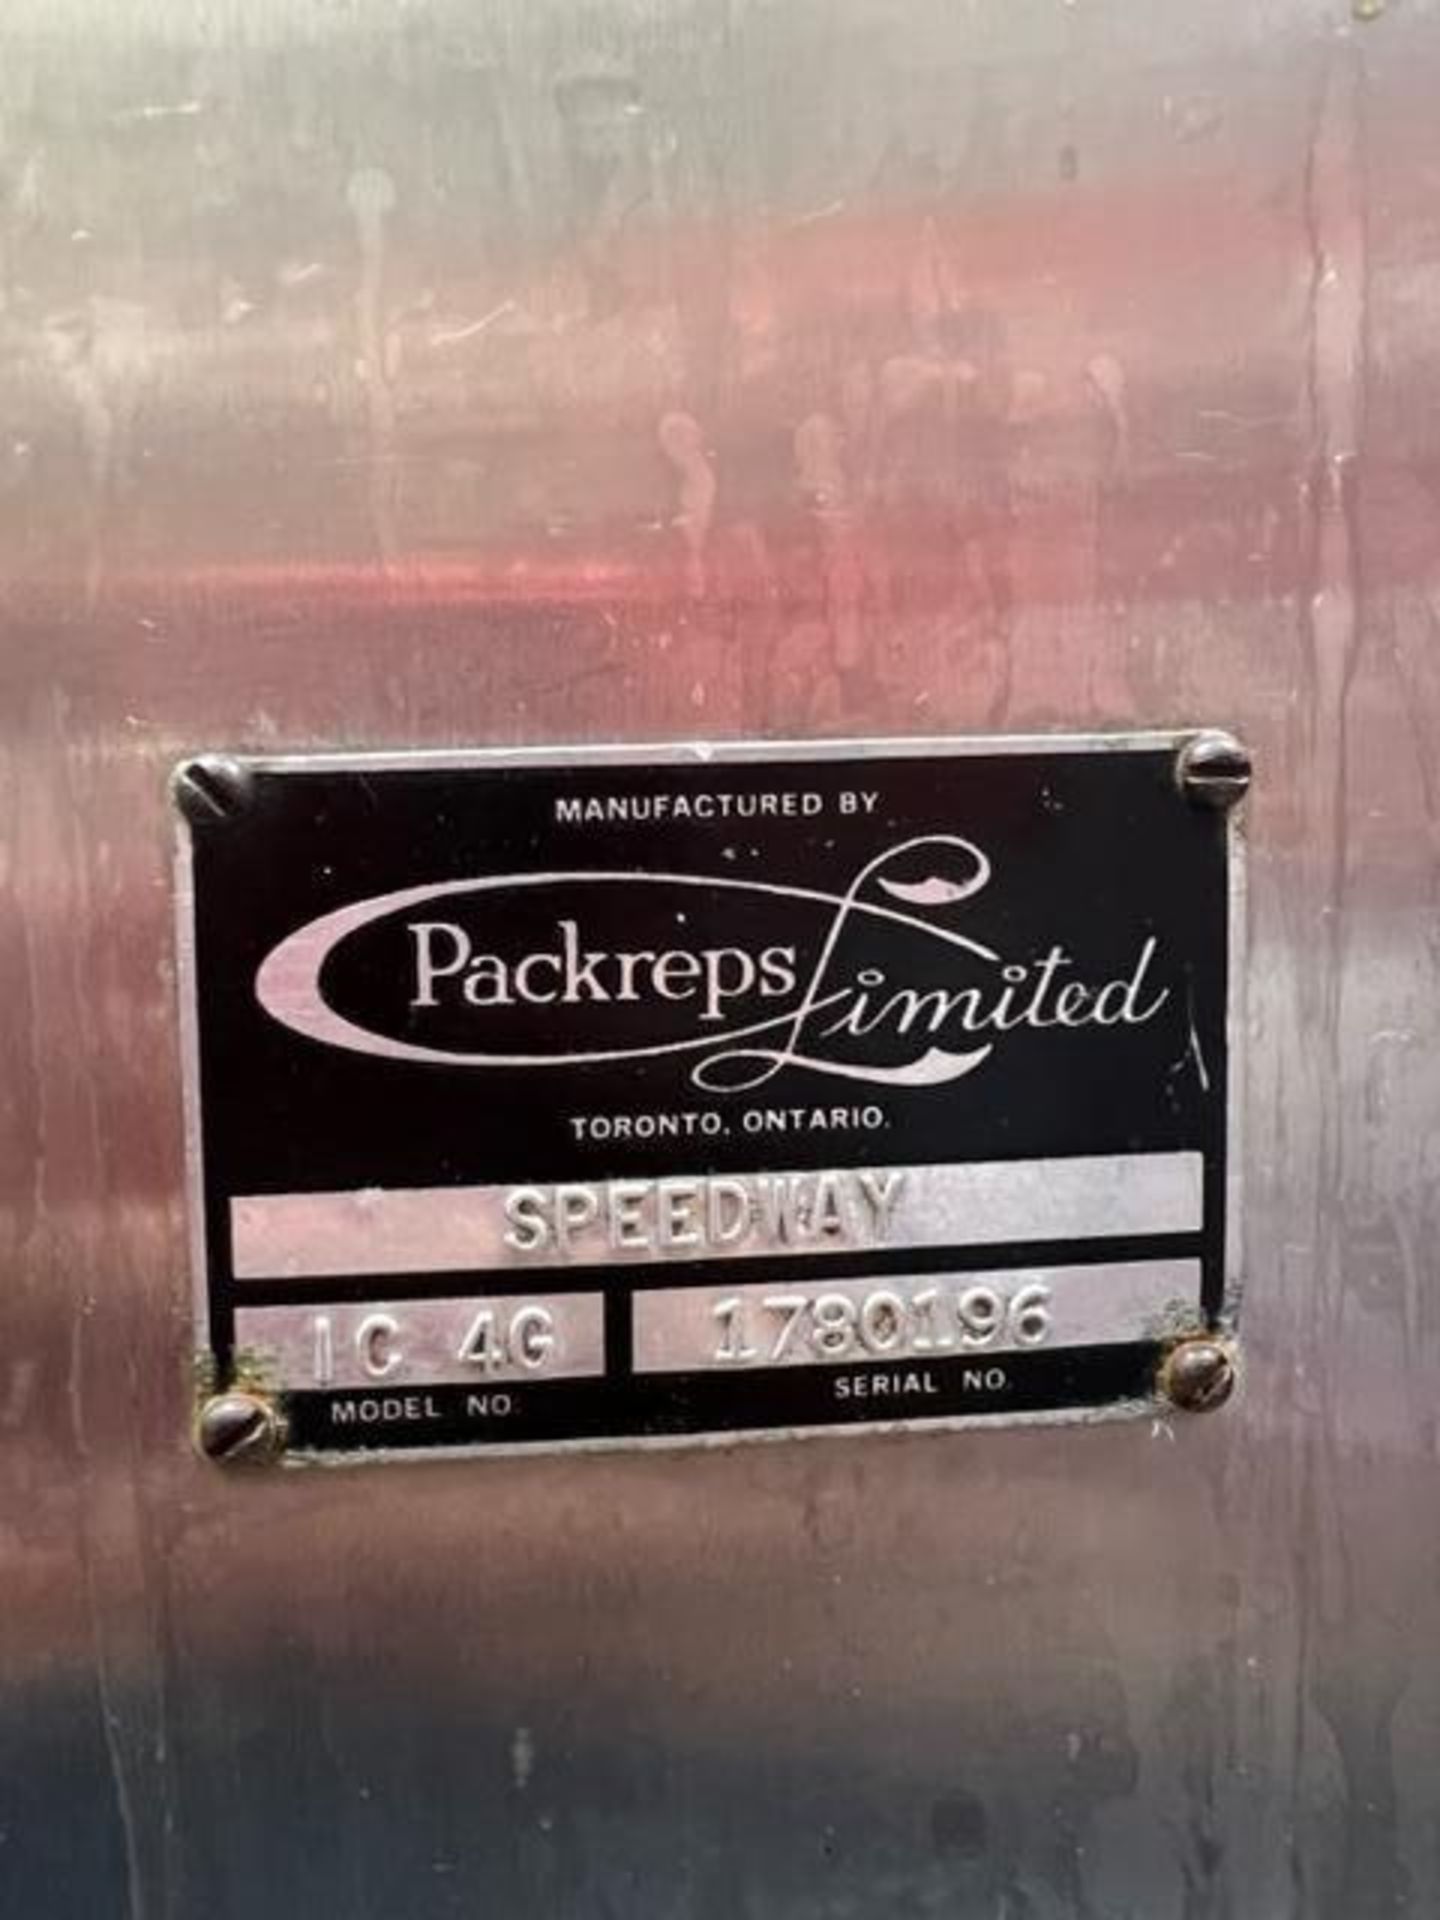 USED PACKREPS LIMITED SPEEDWAY IC 4G 4-HEAD FILLING MACHINE – REFURBISHED 5 YEARS AGO - Image 5 of 5